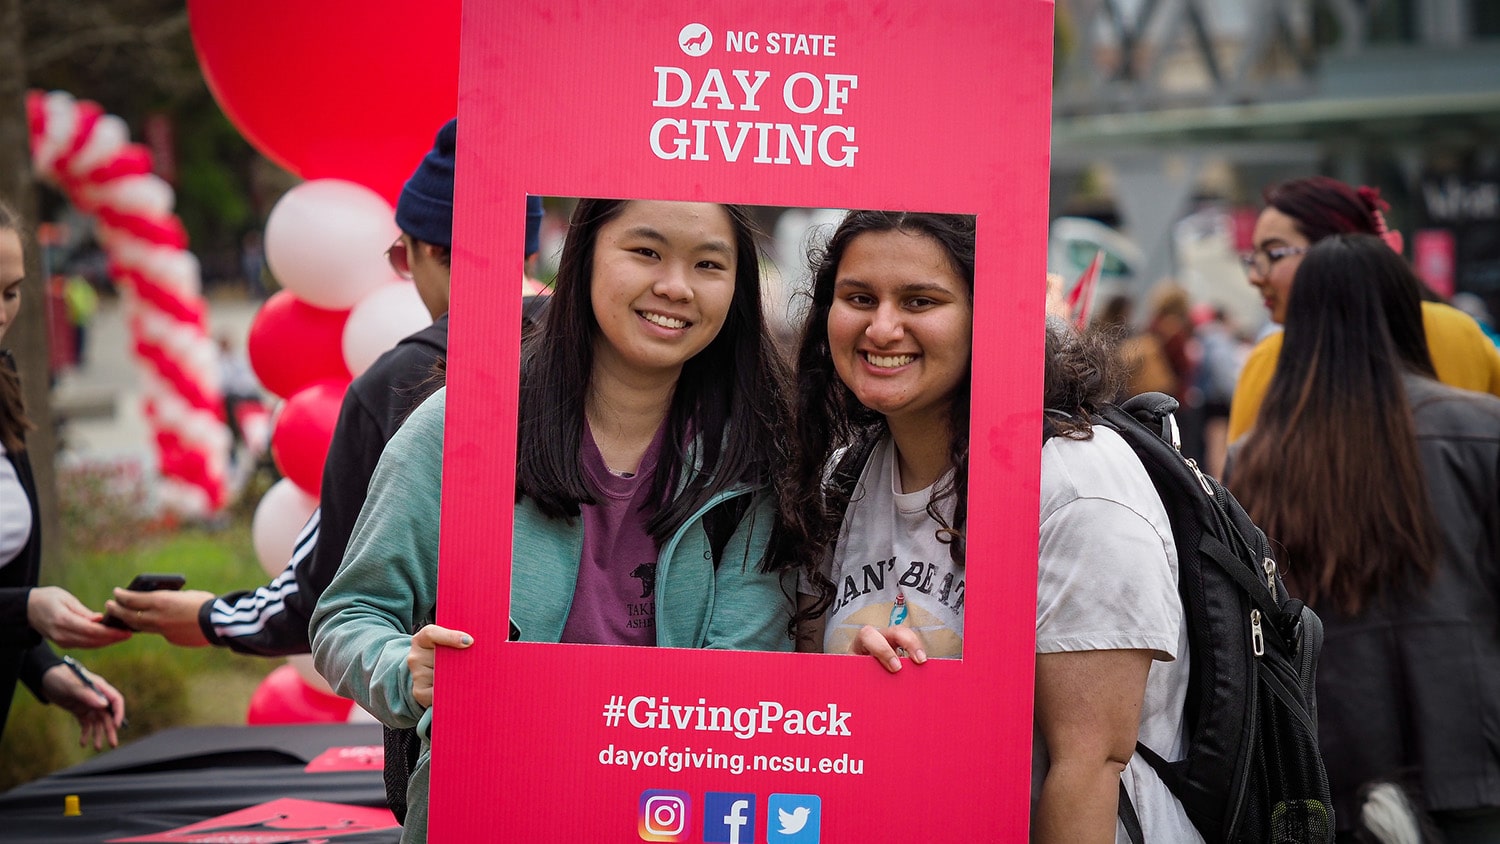 Students participate in on-campus activities for NC State's annual Day of Giving